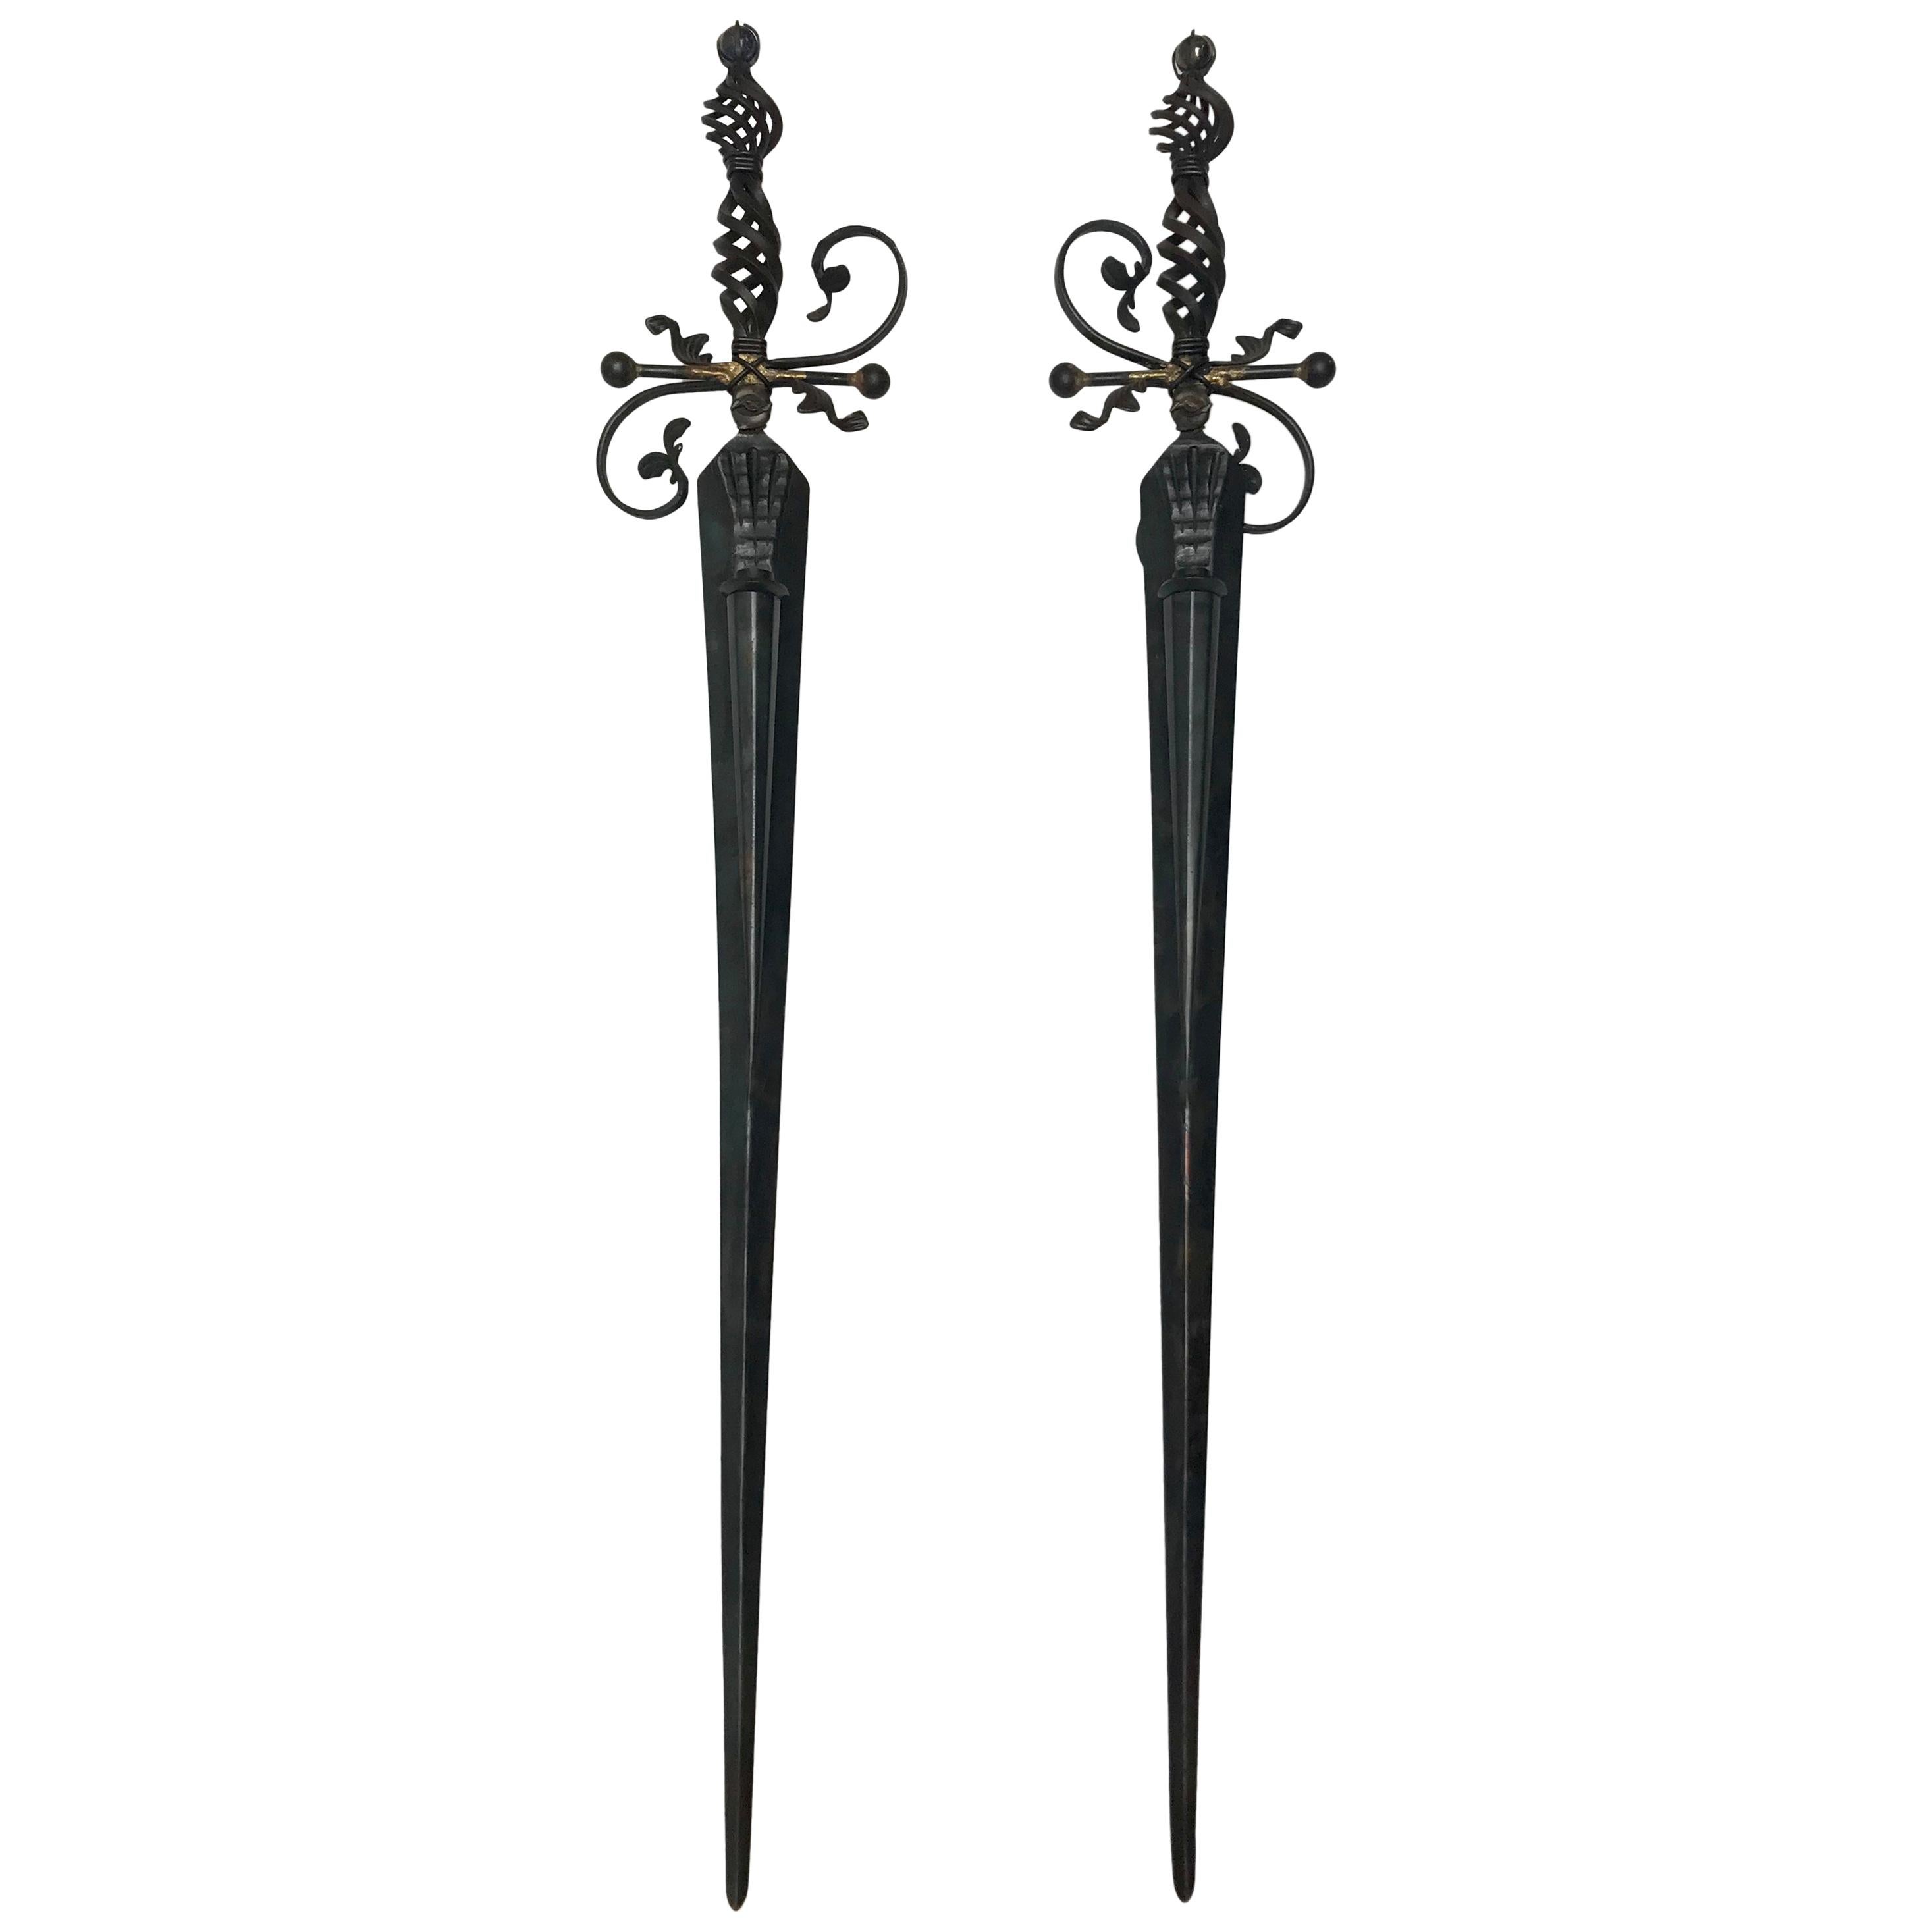 Pair of Wall Mounted Sword Sconces, Mark Brazier-Jones, 1991 For Sale